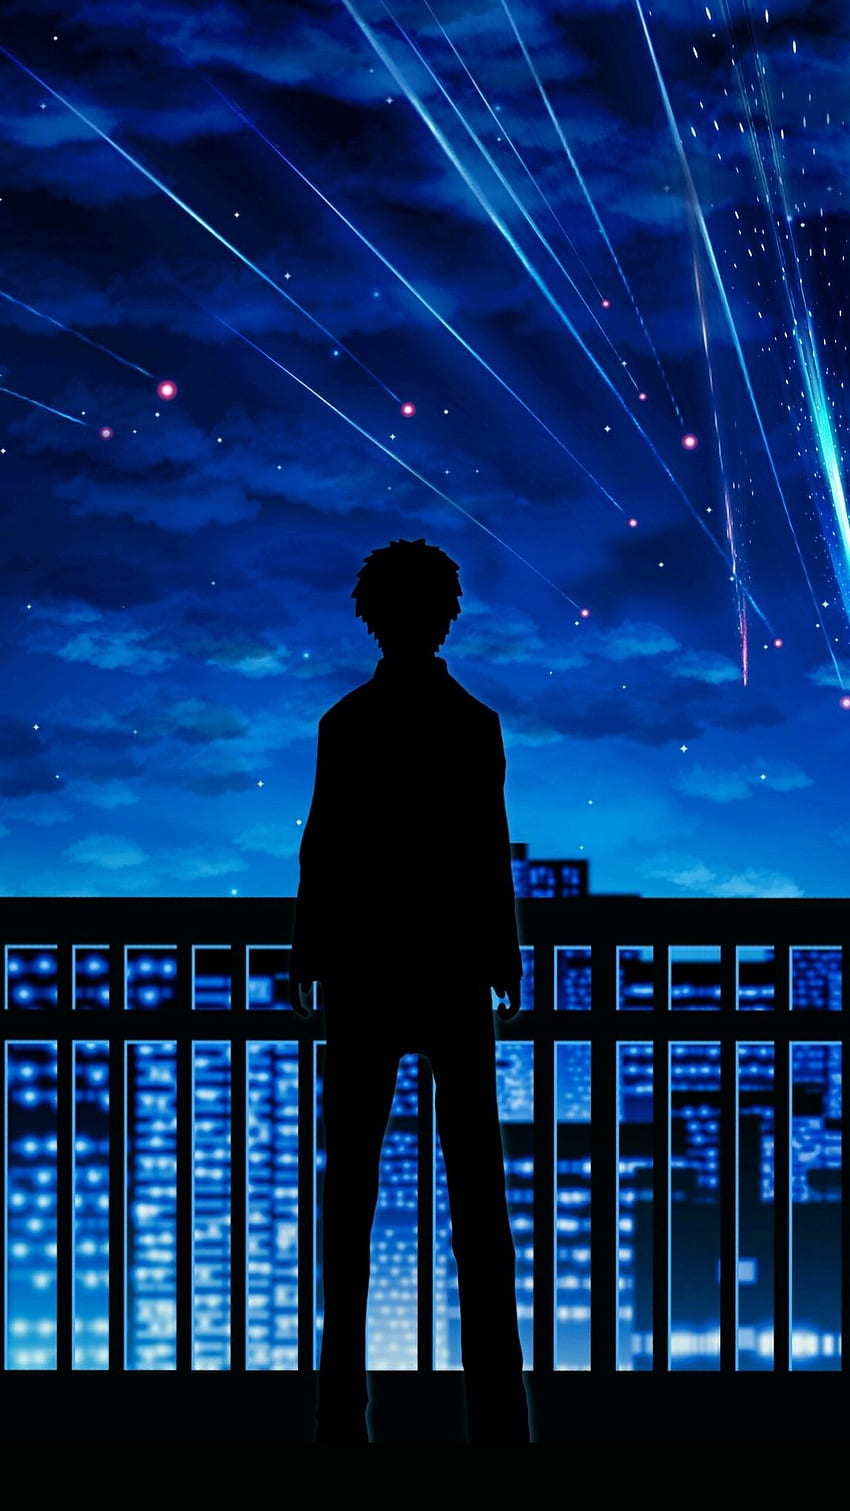 Your Name, meteor, boy, silhouette, fence, bike, Your Name 6s HD phone wallpaper